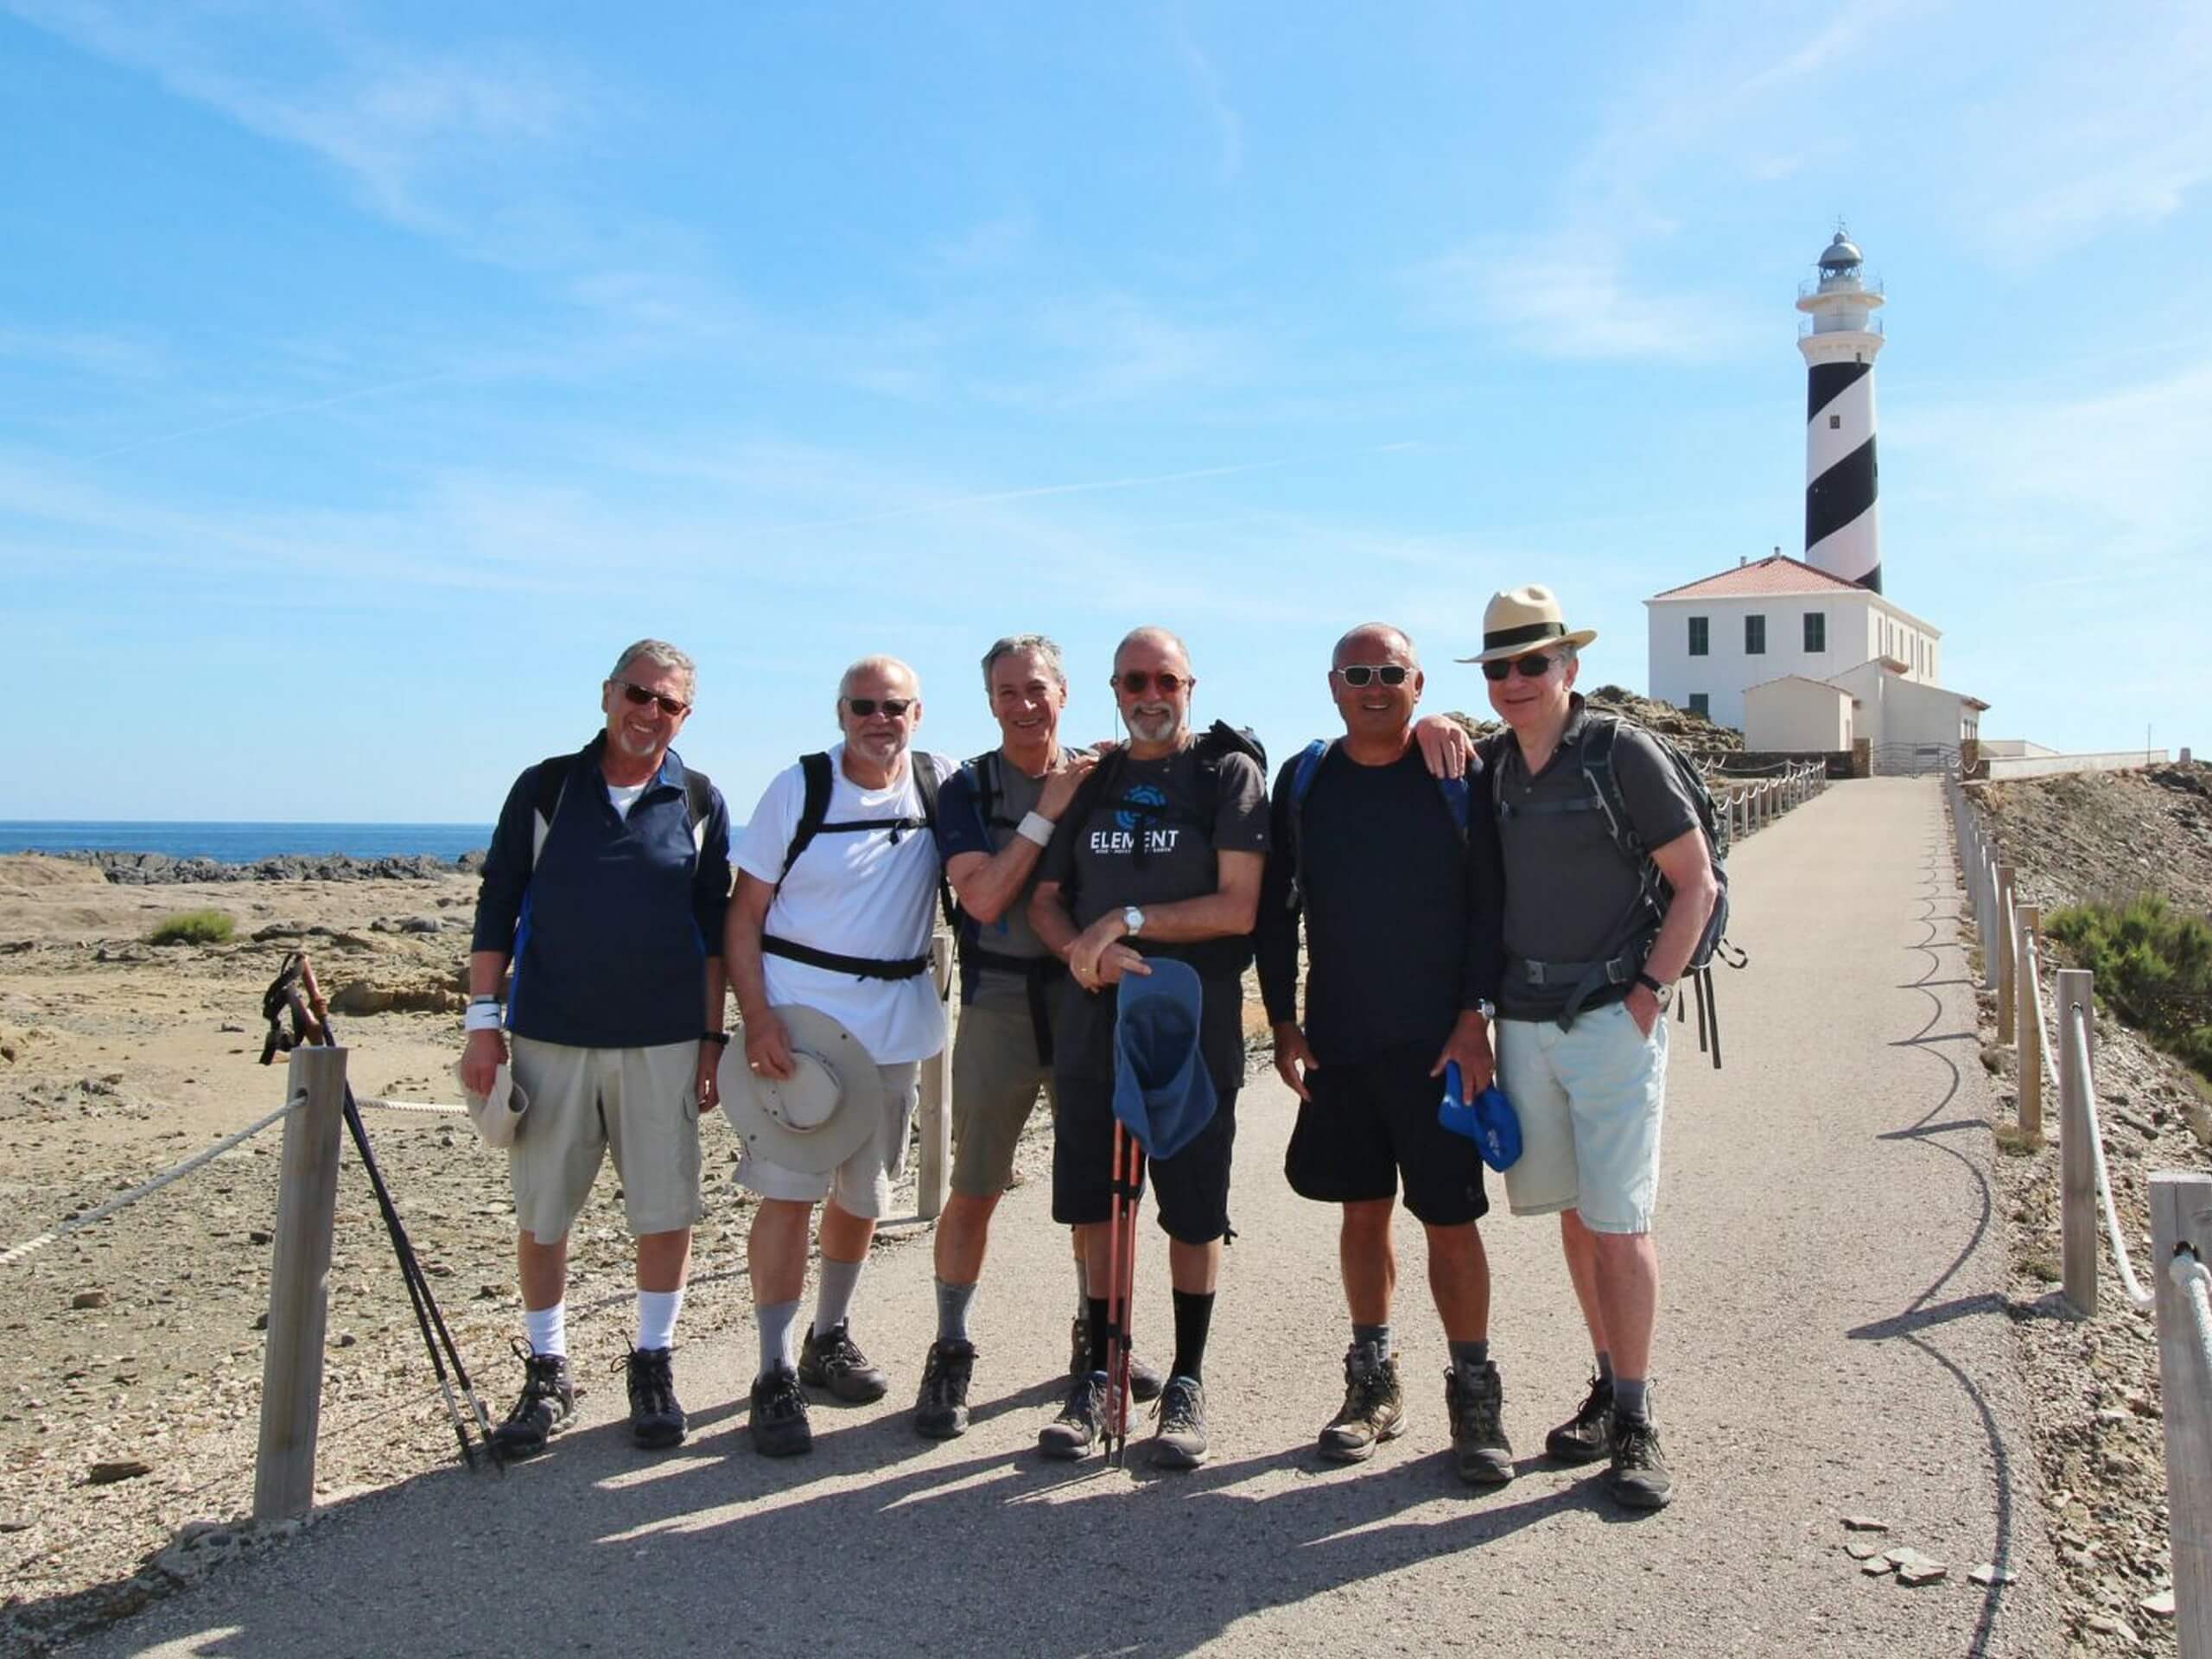 Group of walkers on a self-guided tour in Minorca Island